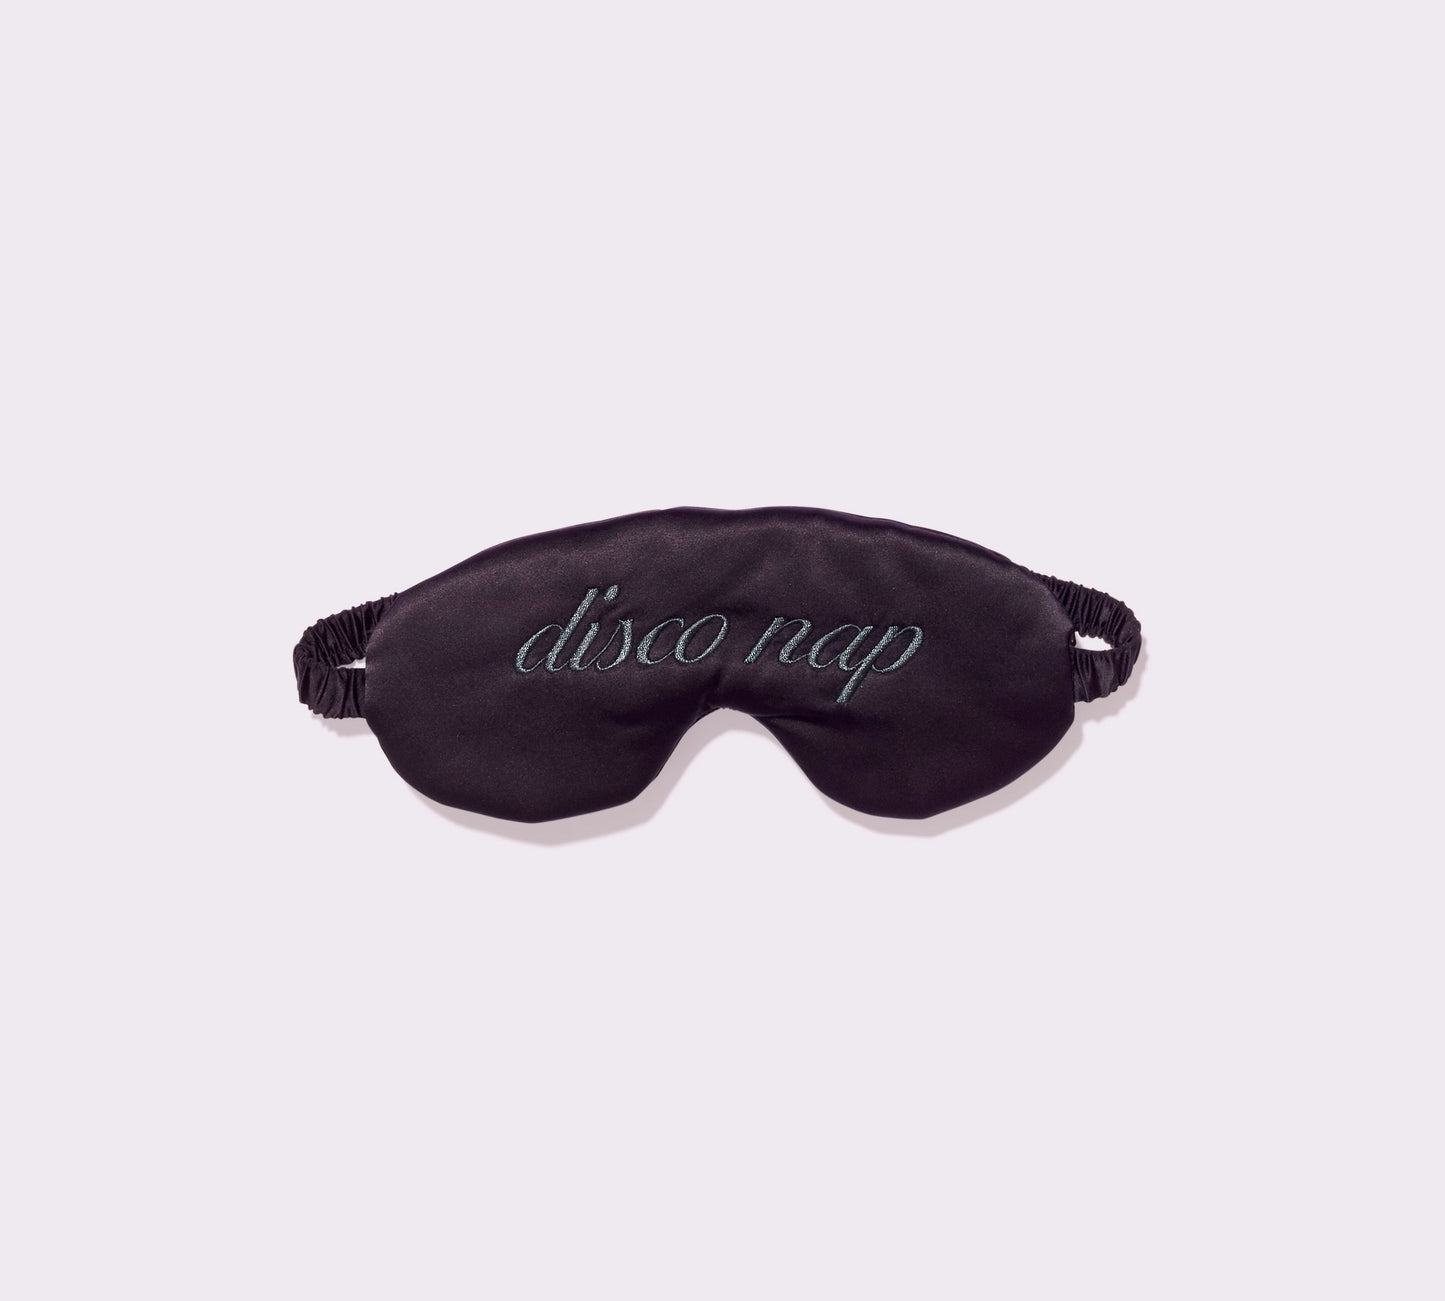 Sleep Mask | Luxe Satin | Archive (Eightball with Embroidery)